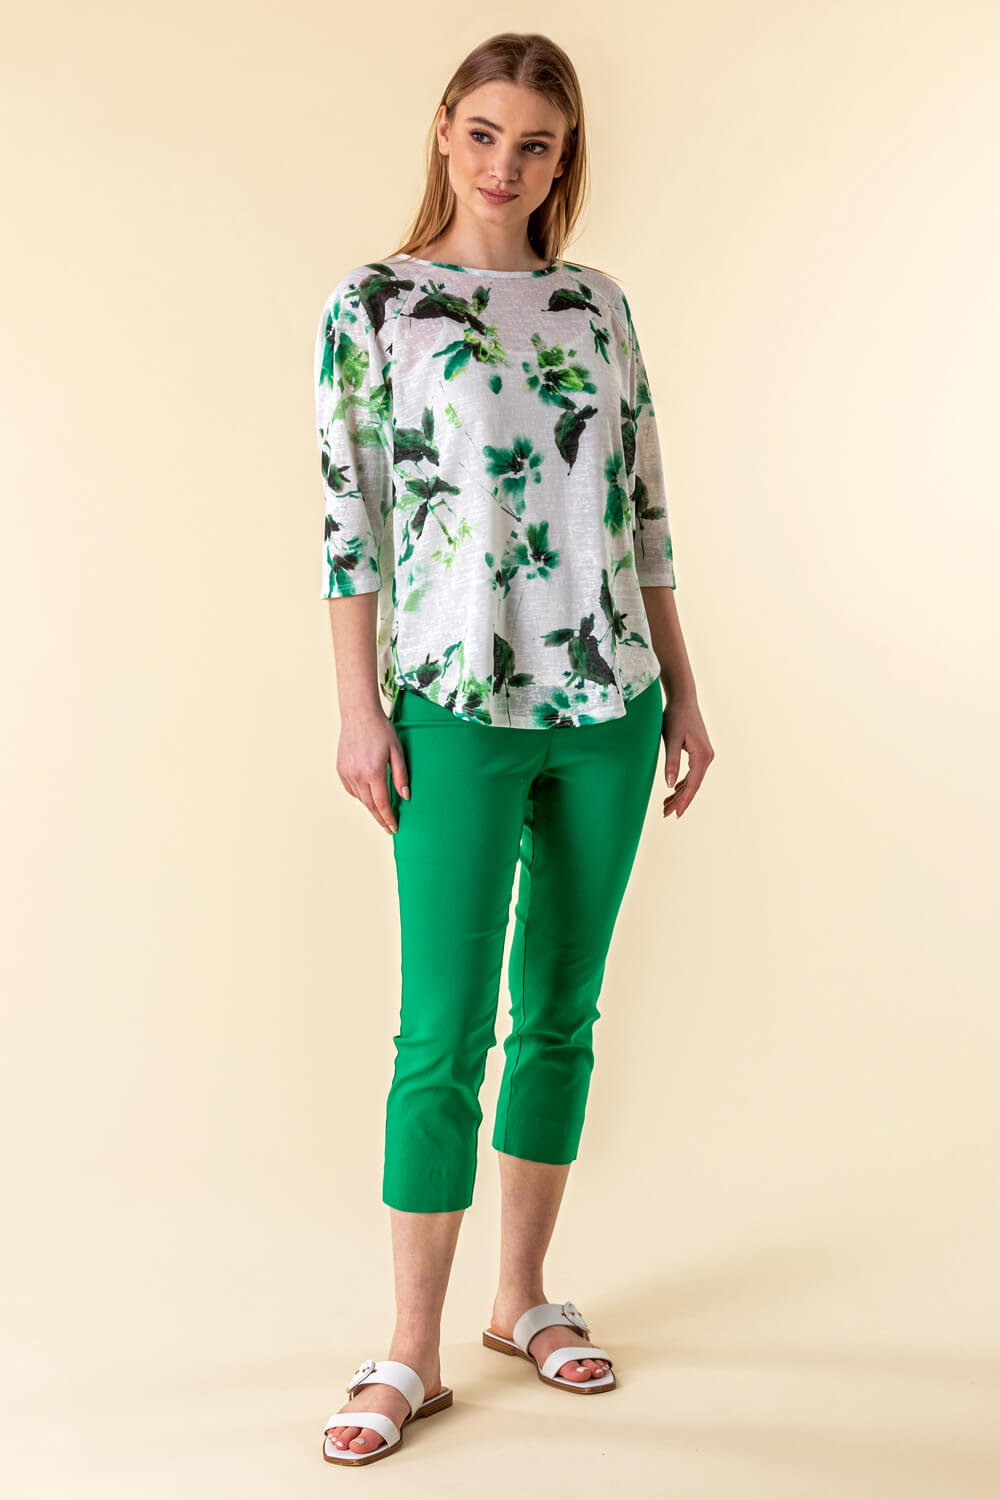 Green Floral Print Jersey Top, Image 2 of 4